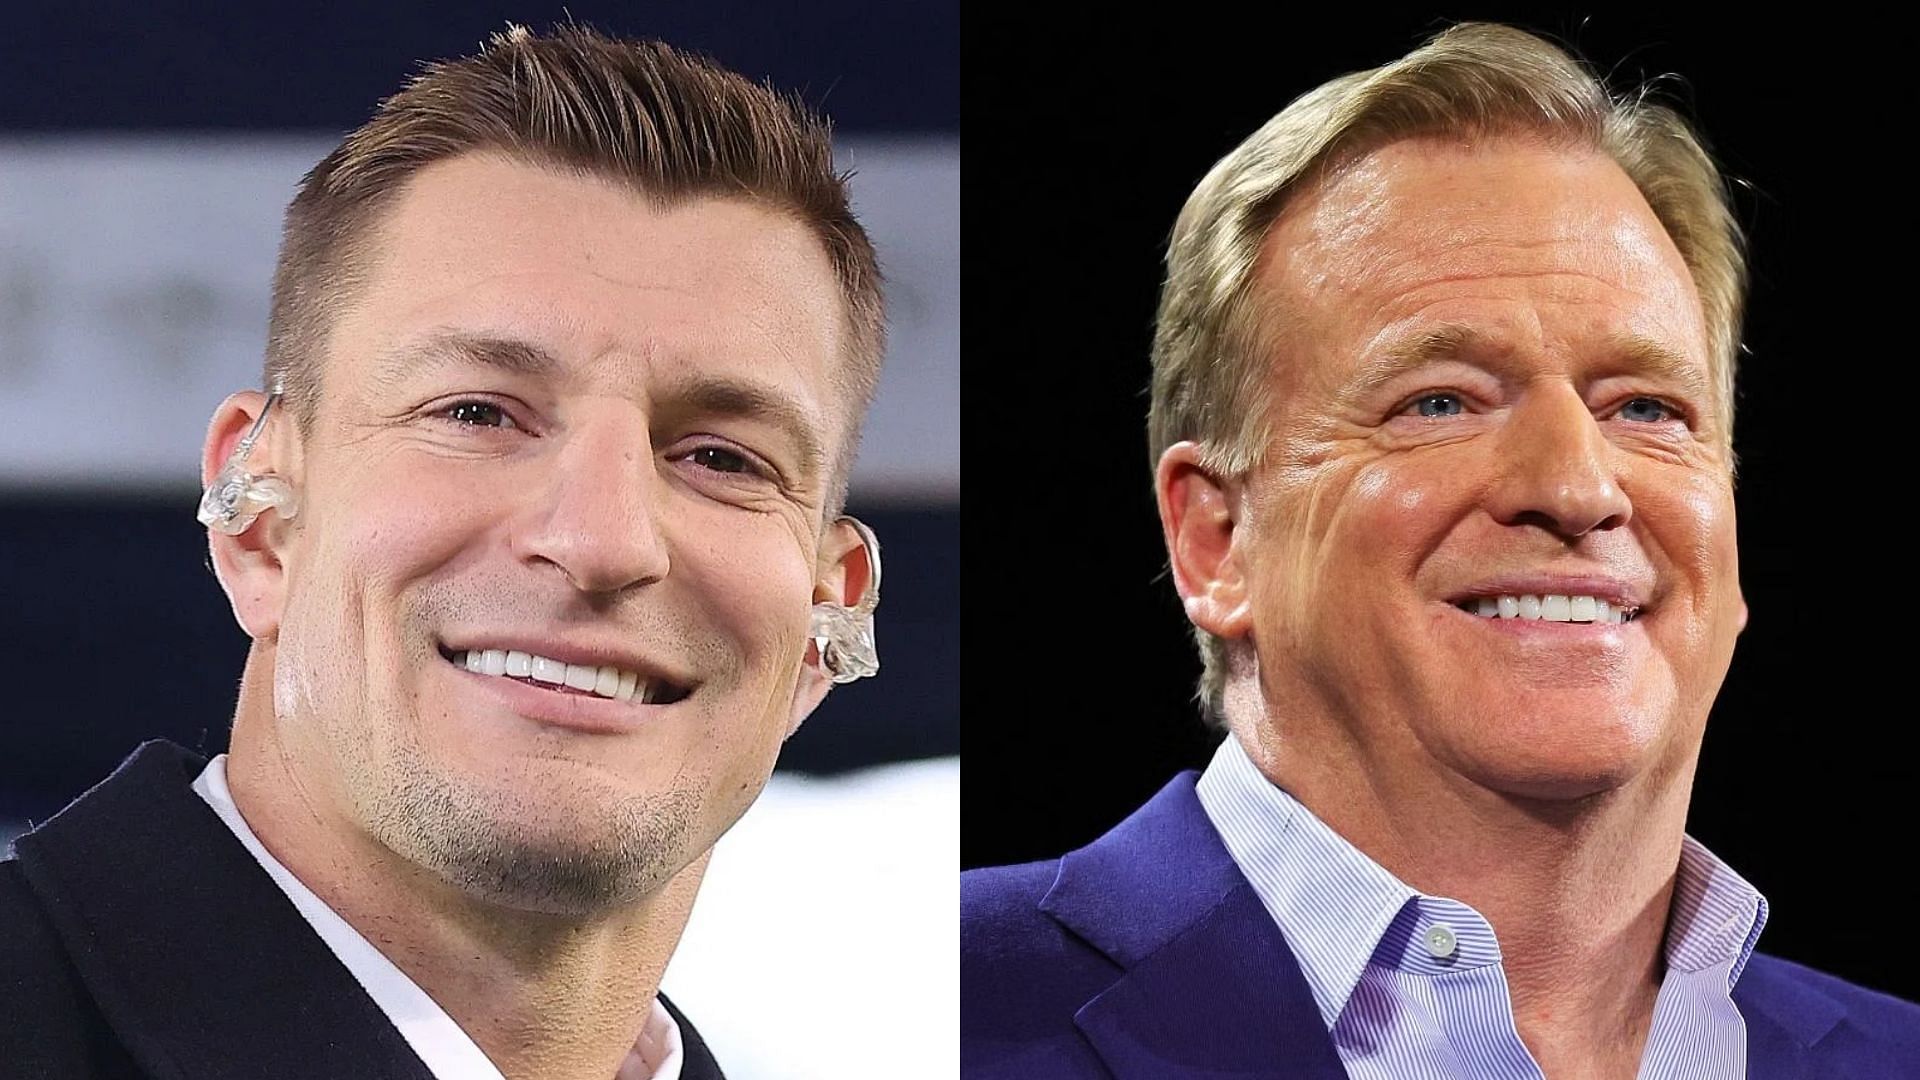 In 2020, former NFL tight end Rob Gronkowski unintentionally prank-called NFL Commissioner Roger Goodell, who called to congratulate him for making the NFL 100th Anniversary All-Time Team.